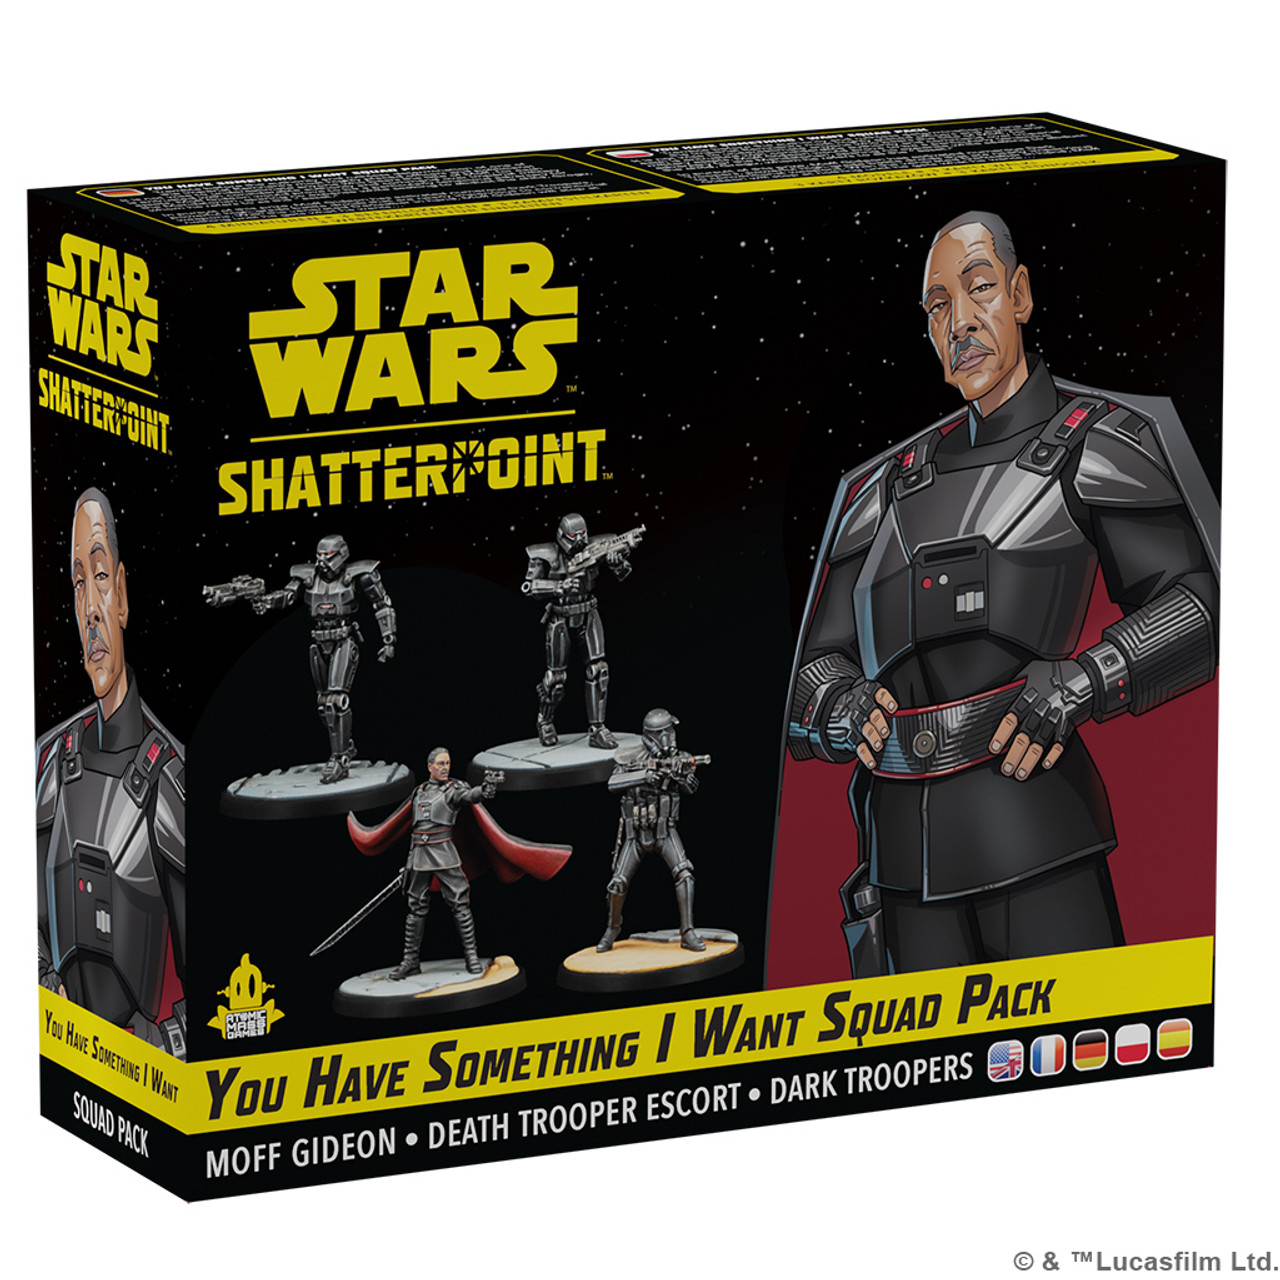 SWP26 - STAR WARS: SHATTERPOINT - YOU HAVE SOMETHING I WANT SQUAD PACK